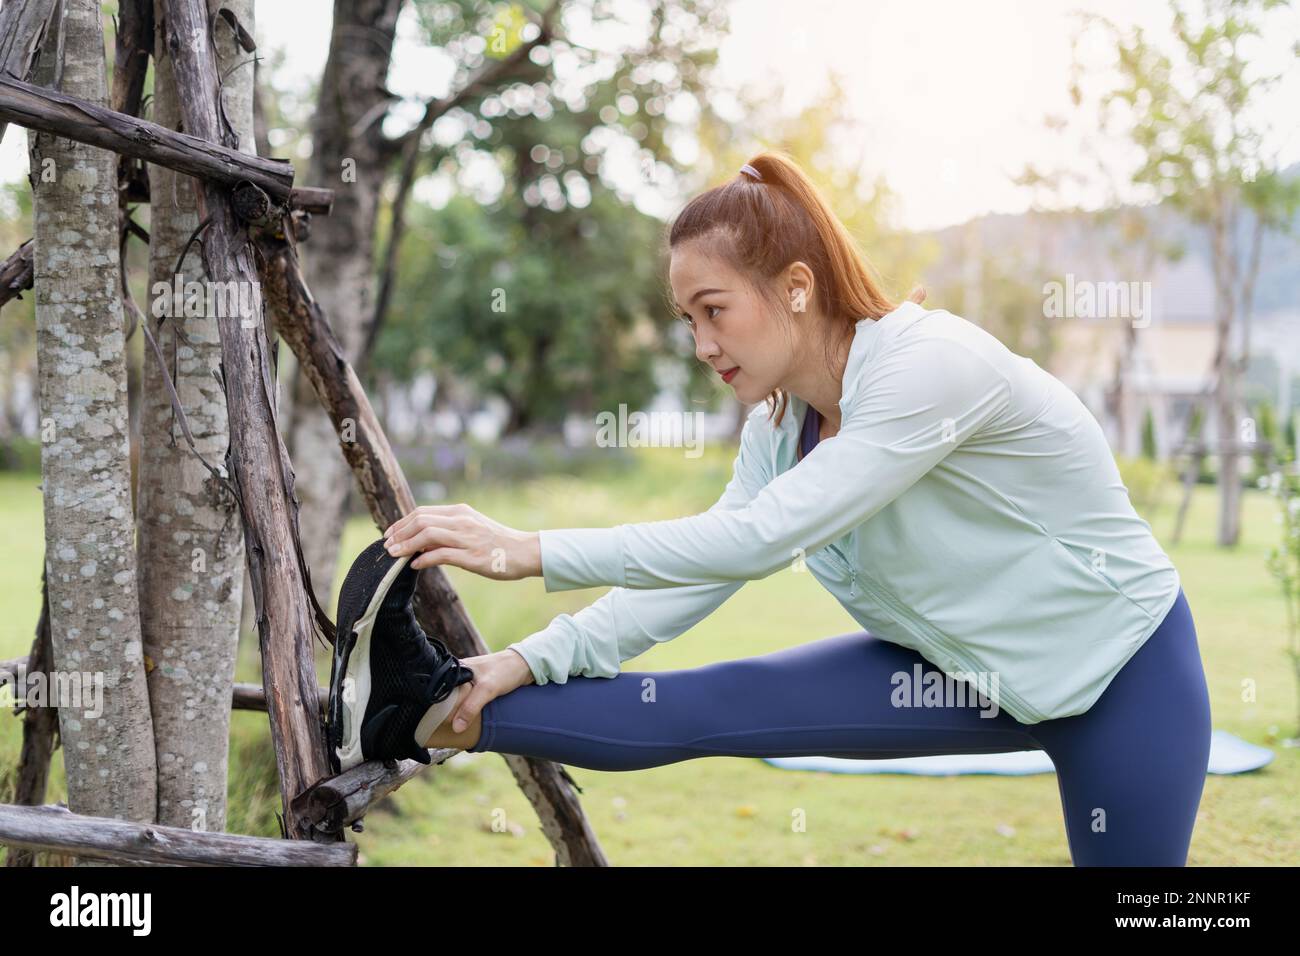 City life and Healthy lifestyle concept. Female athlete runner. Woman stretching her leg outside before running. Portrait of sporty woman doing hamstr Stock Photo